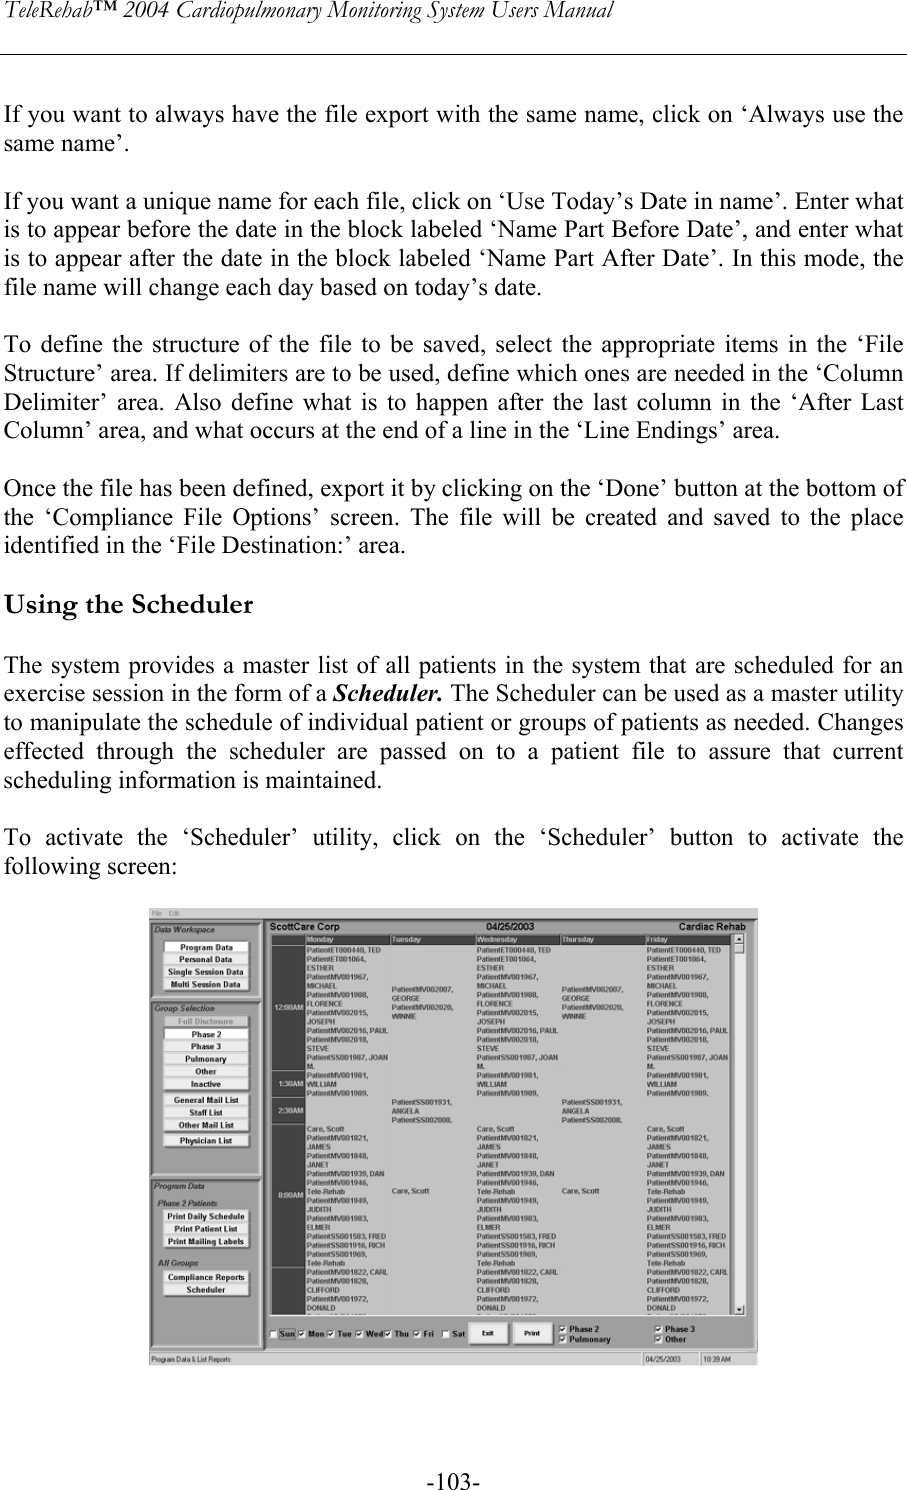 TeleRehab™ 2004 Cardiopulmonary Monitoring System Users Manual    -103- If you want to always have the file export with the same name, click on ‘Always use the same name’.  If you want a unique name for each file, click on ‘Use Today’s Date in name’. Enter what is to appear before the date in the block labeled ‘Name Part Before Date’, and enter what is to appear after the date in the block labeled ‘Name Part After Date’. In this mode, the file name will change each day based on today’s date.  To define the structure of the file to be saved, select the appropriate items in the ‘File Structure’ area. If delimiters are to be used, define which ones are needed in the ‘Column Delimiter’ area. Also define what is to happen after the last column in the ‘After Last Column’ area, and what occurs at the end of a line in the ‘Line Endings’ area.  Once the file has been defined, export it by clicking on the ‘Done’ button at the bottom of the ‘Compliance File Options’ screen. The file will be created and saved to the place identified in the ‘File Destination:’ area.  Using the Scheduler  The system provides a master list of all patients in the system that are scheduled for an exercise session in the form of a Scheduler. The Scheduler can be used as a master utility to manipulate the schedule of individual patient or groups of patients as needed. Changes effected through the scheduler are passed on to a patient file to assure that current scheduling information is maintained.  To activate the ‘Scheduler’ utility, click on the ‘Scheduler’ button to activate the following screen:     